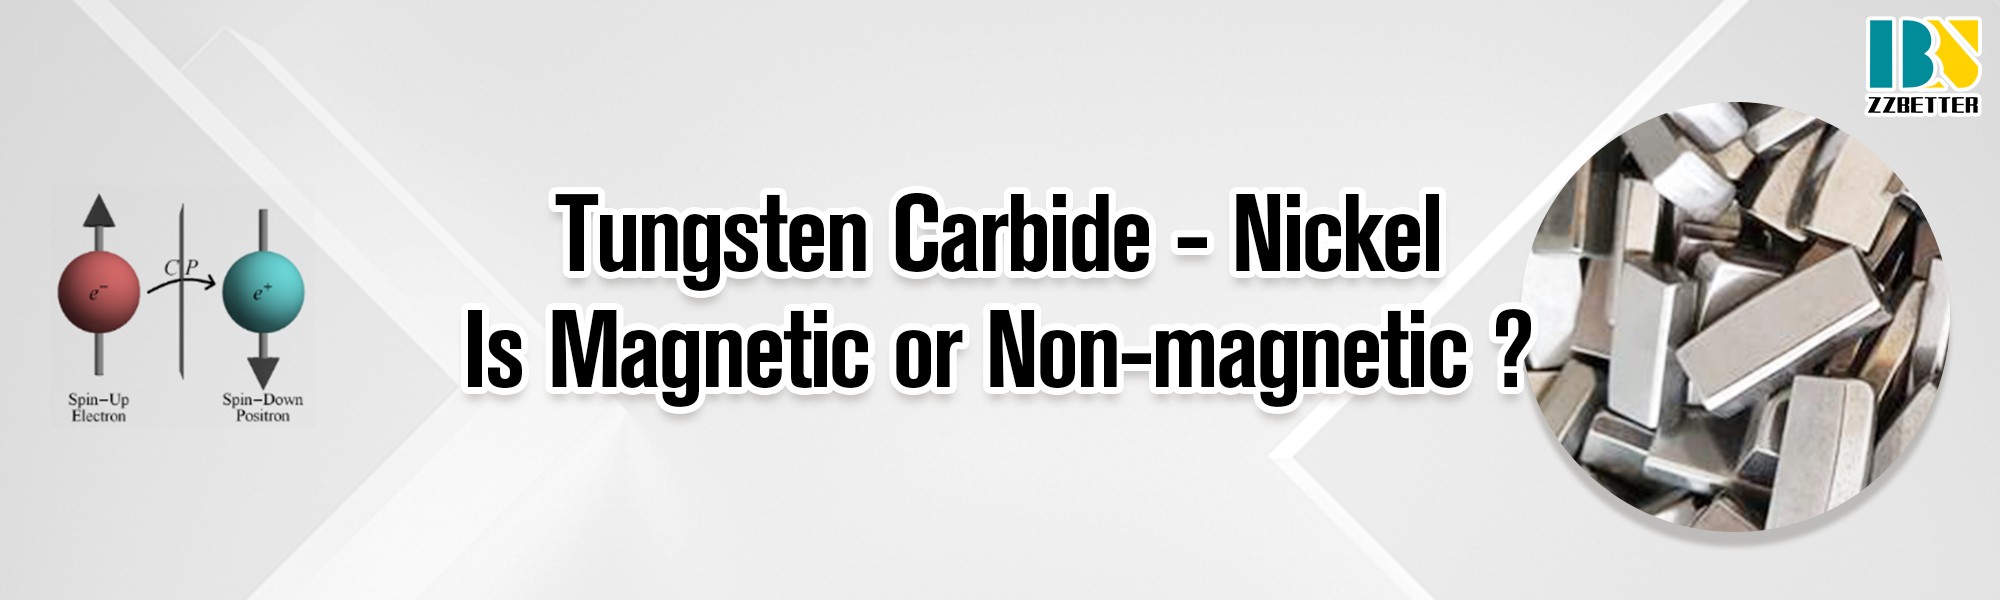 region chikane tang Tungsten Carbide-Nickel Is Magnetic or Non-magnetic?